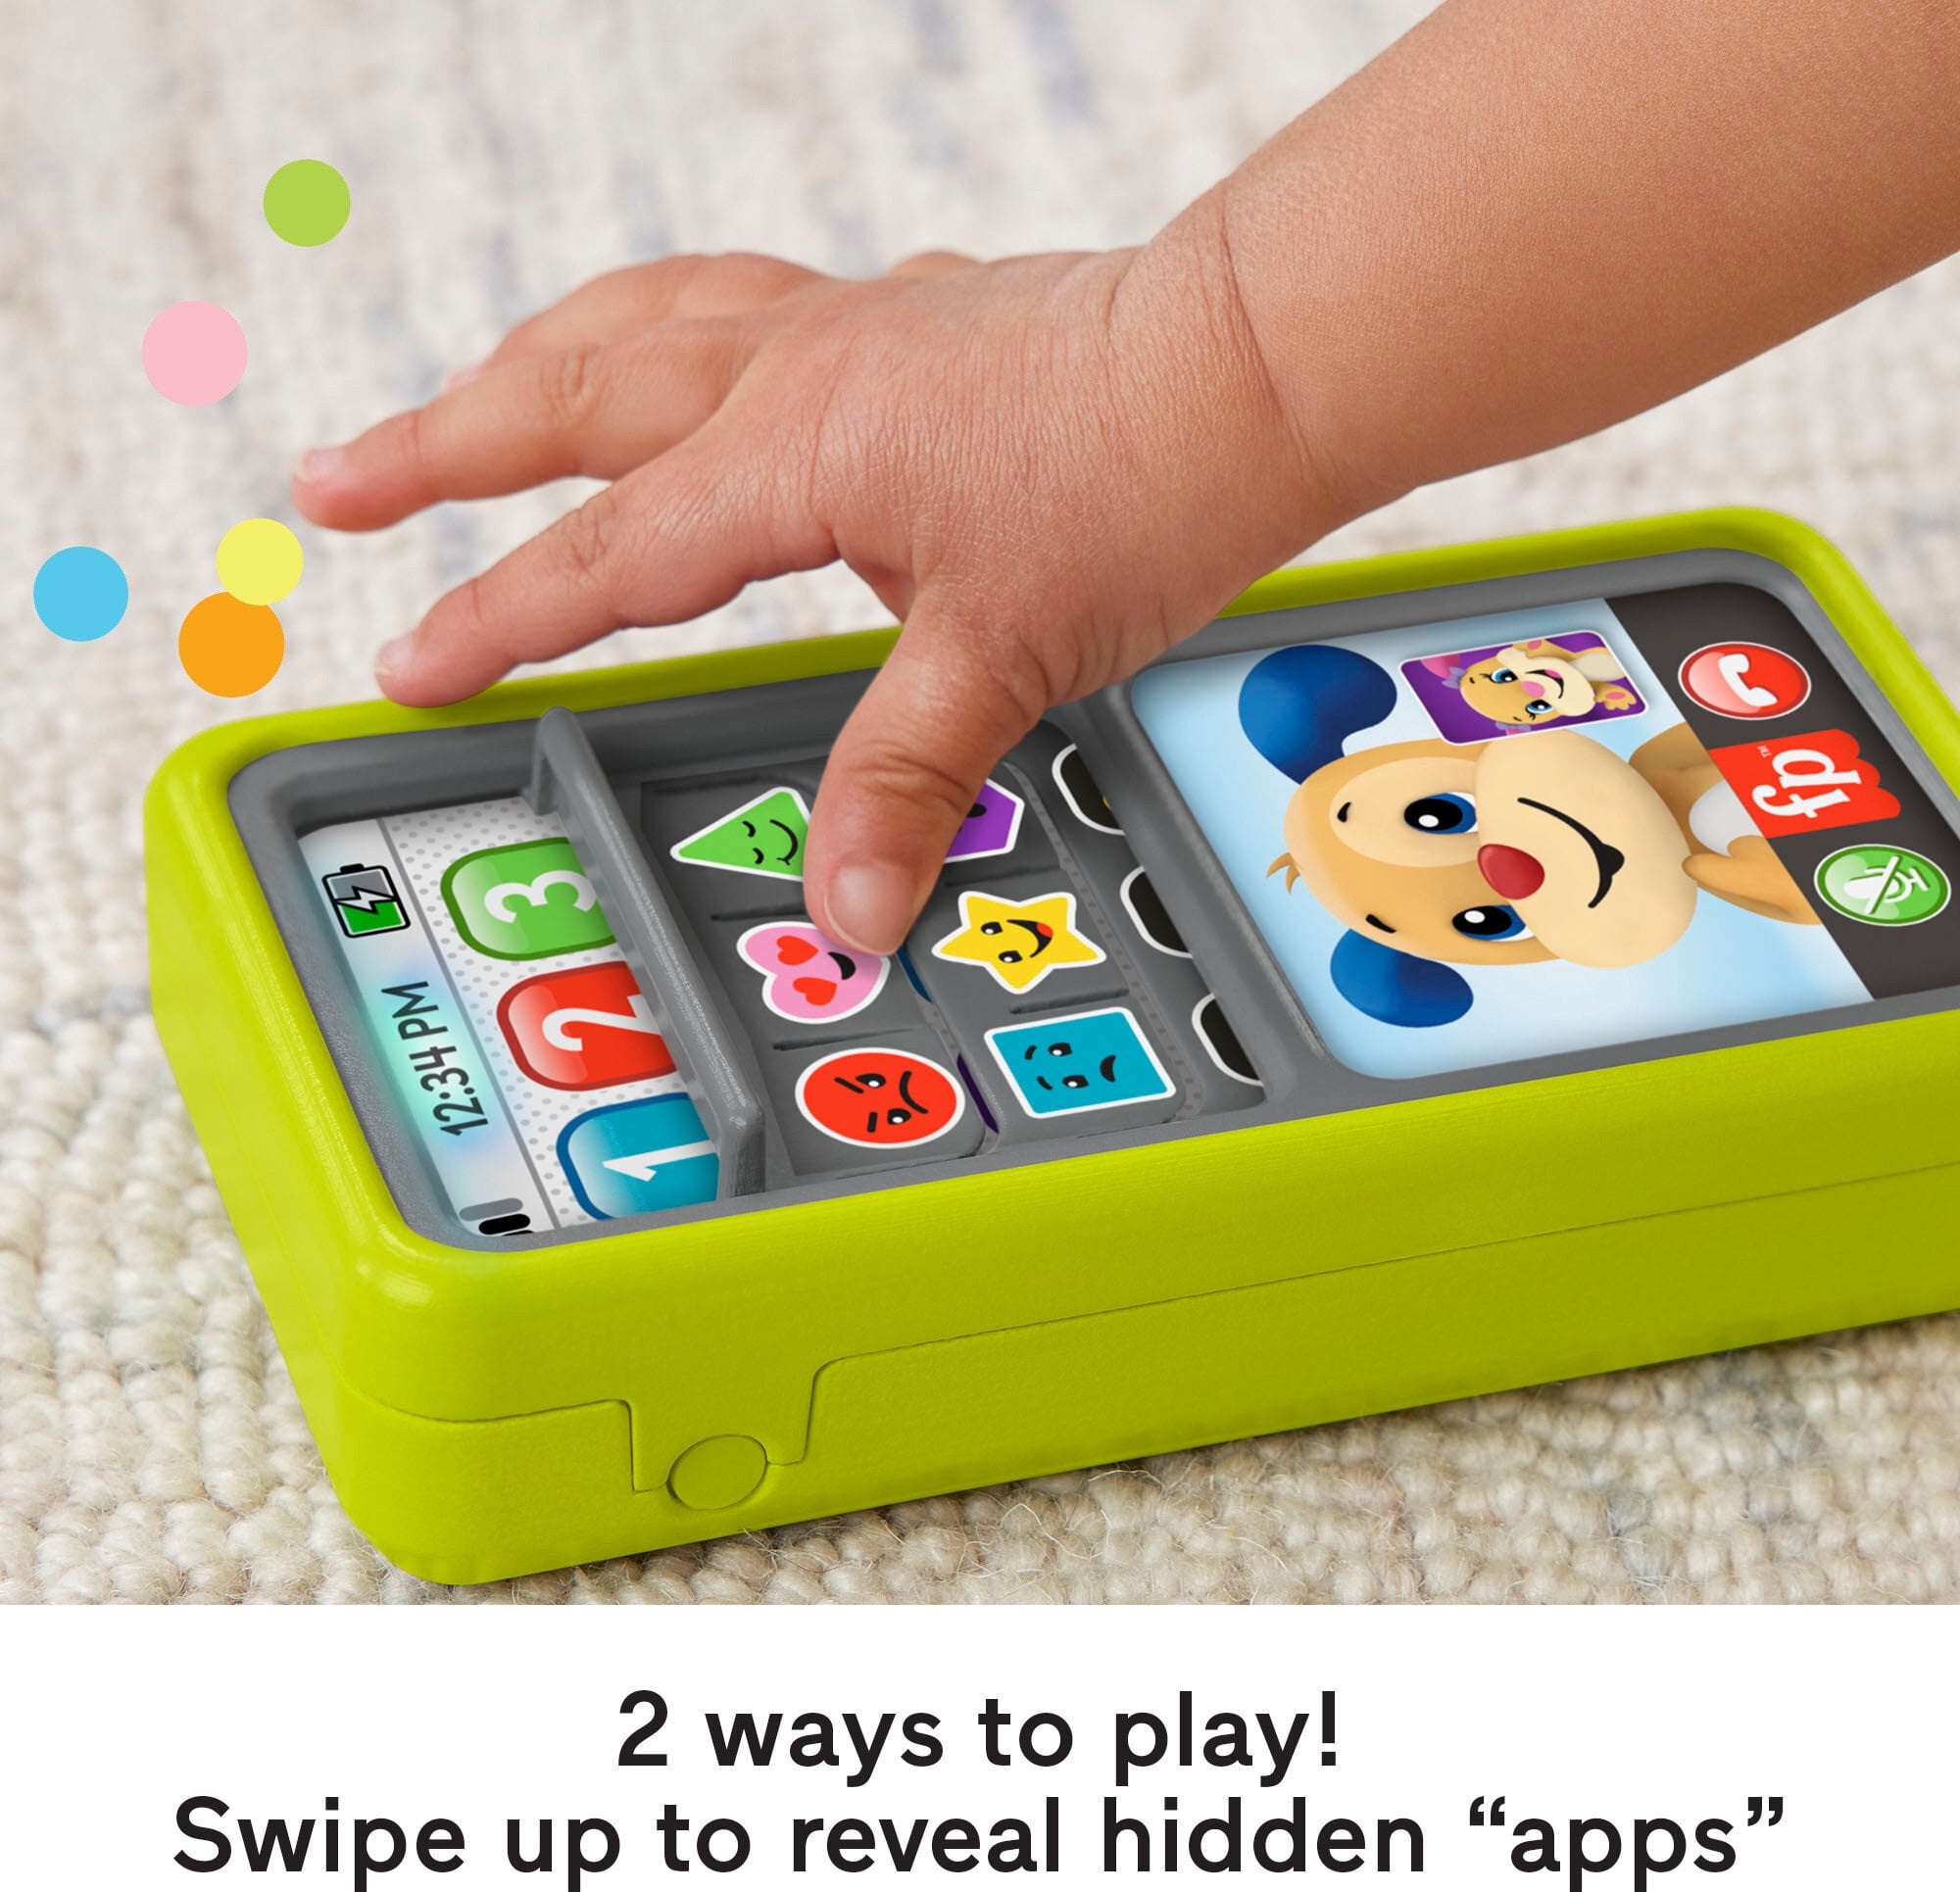 Fisher-Price 2-In-1 Slide To Learn Smartphone